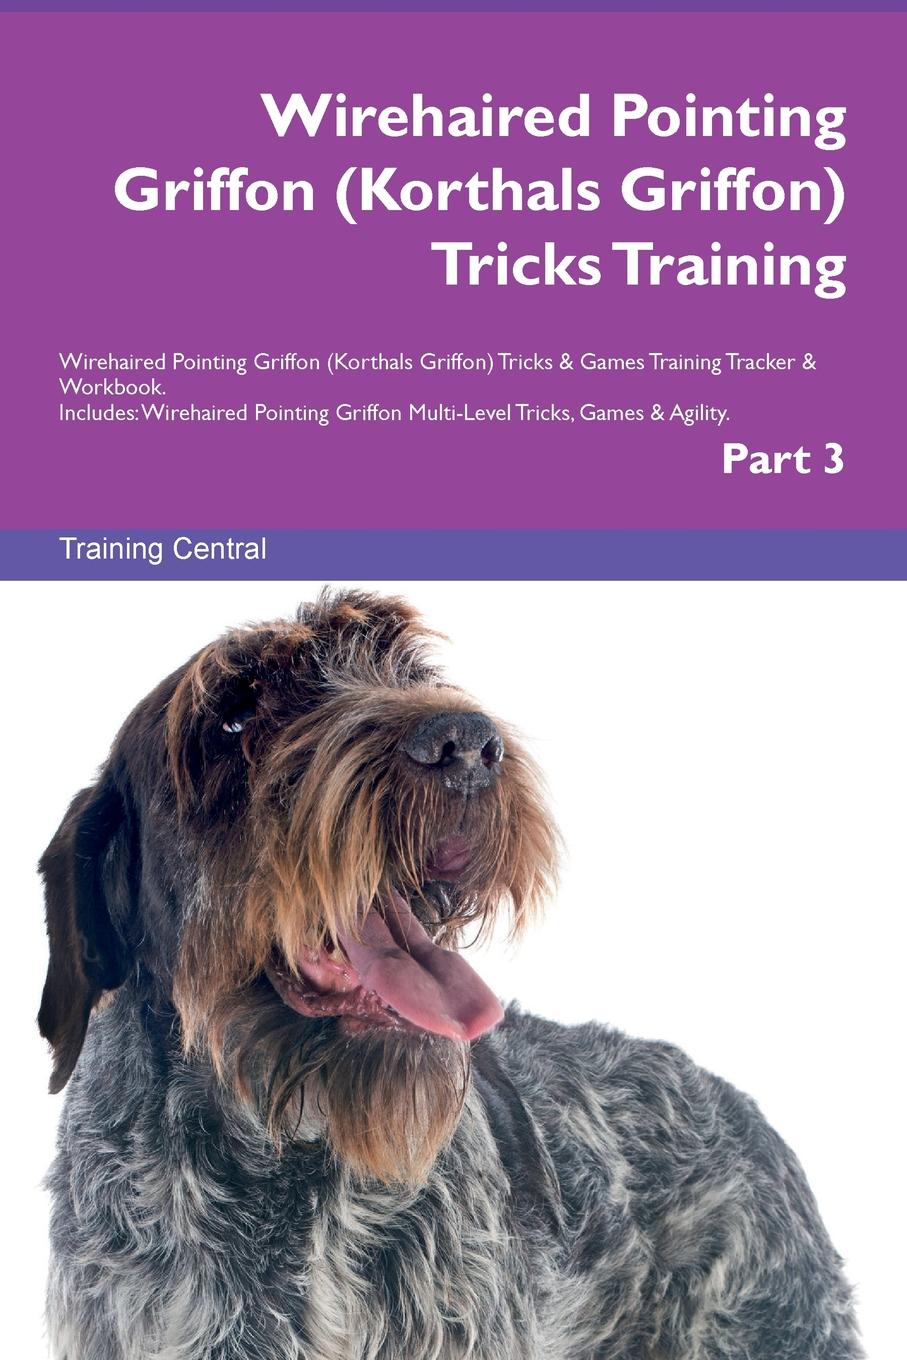 Training Central Wirehaired Pointing Griffon (Korthals Griffon) Tricks Training Wirehaired Pointing Griffon (Korthals Griffon) Tricks . Games Training Tracker . Workbook. Includes. Wirehaired Pointing Griffon Multi-Level Tricks, Games . Agility. Part 3